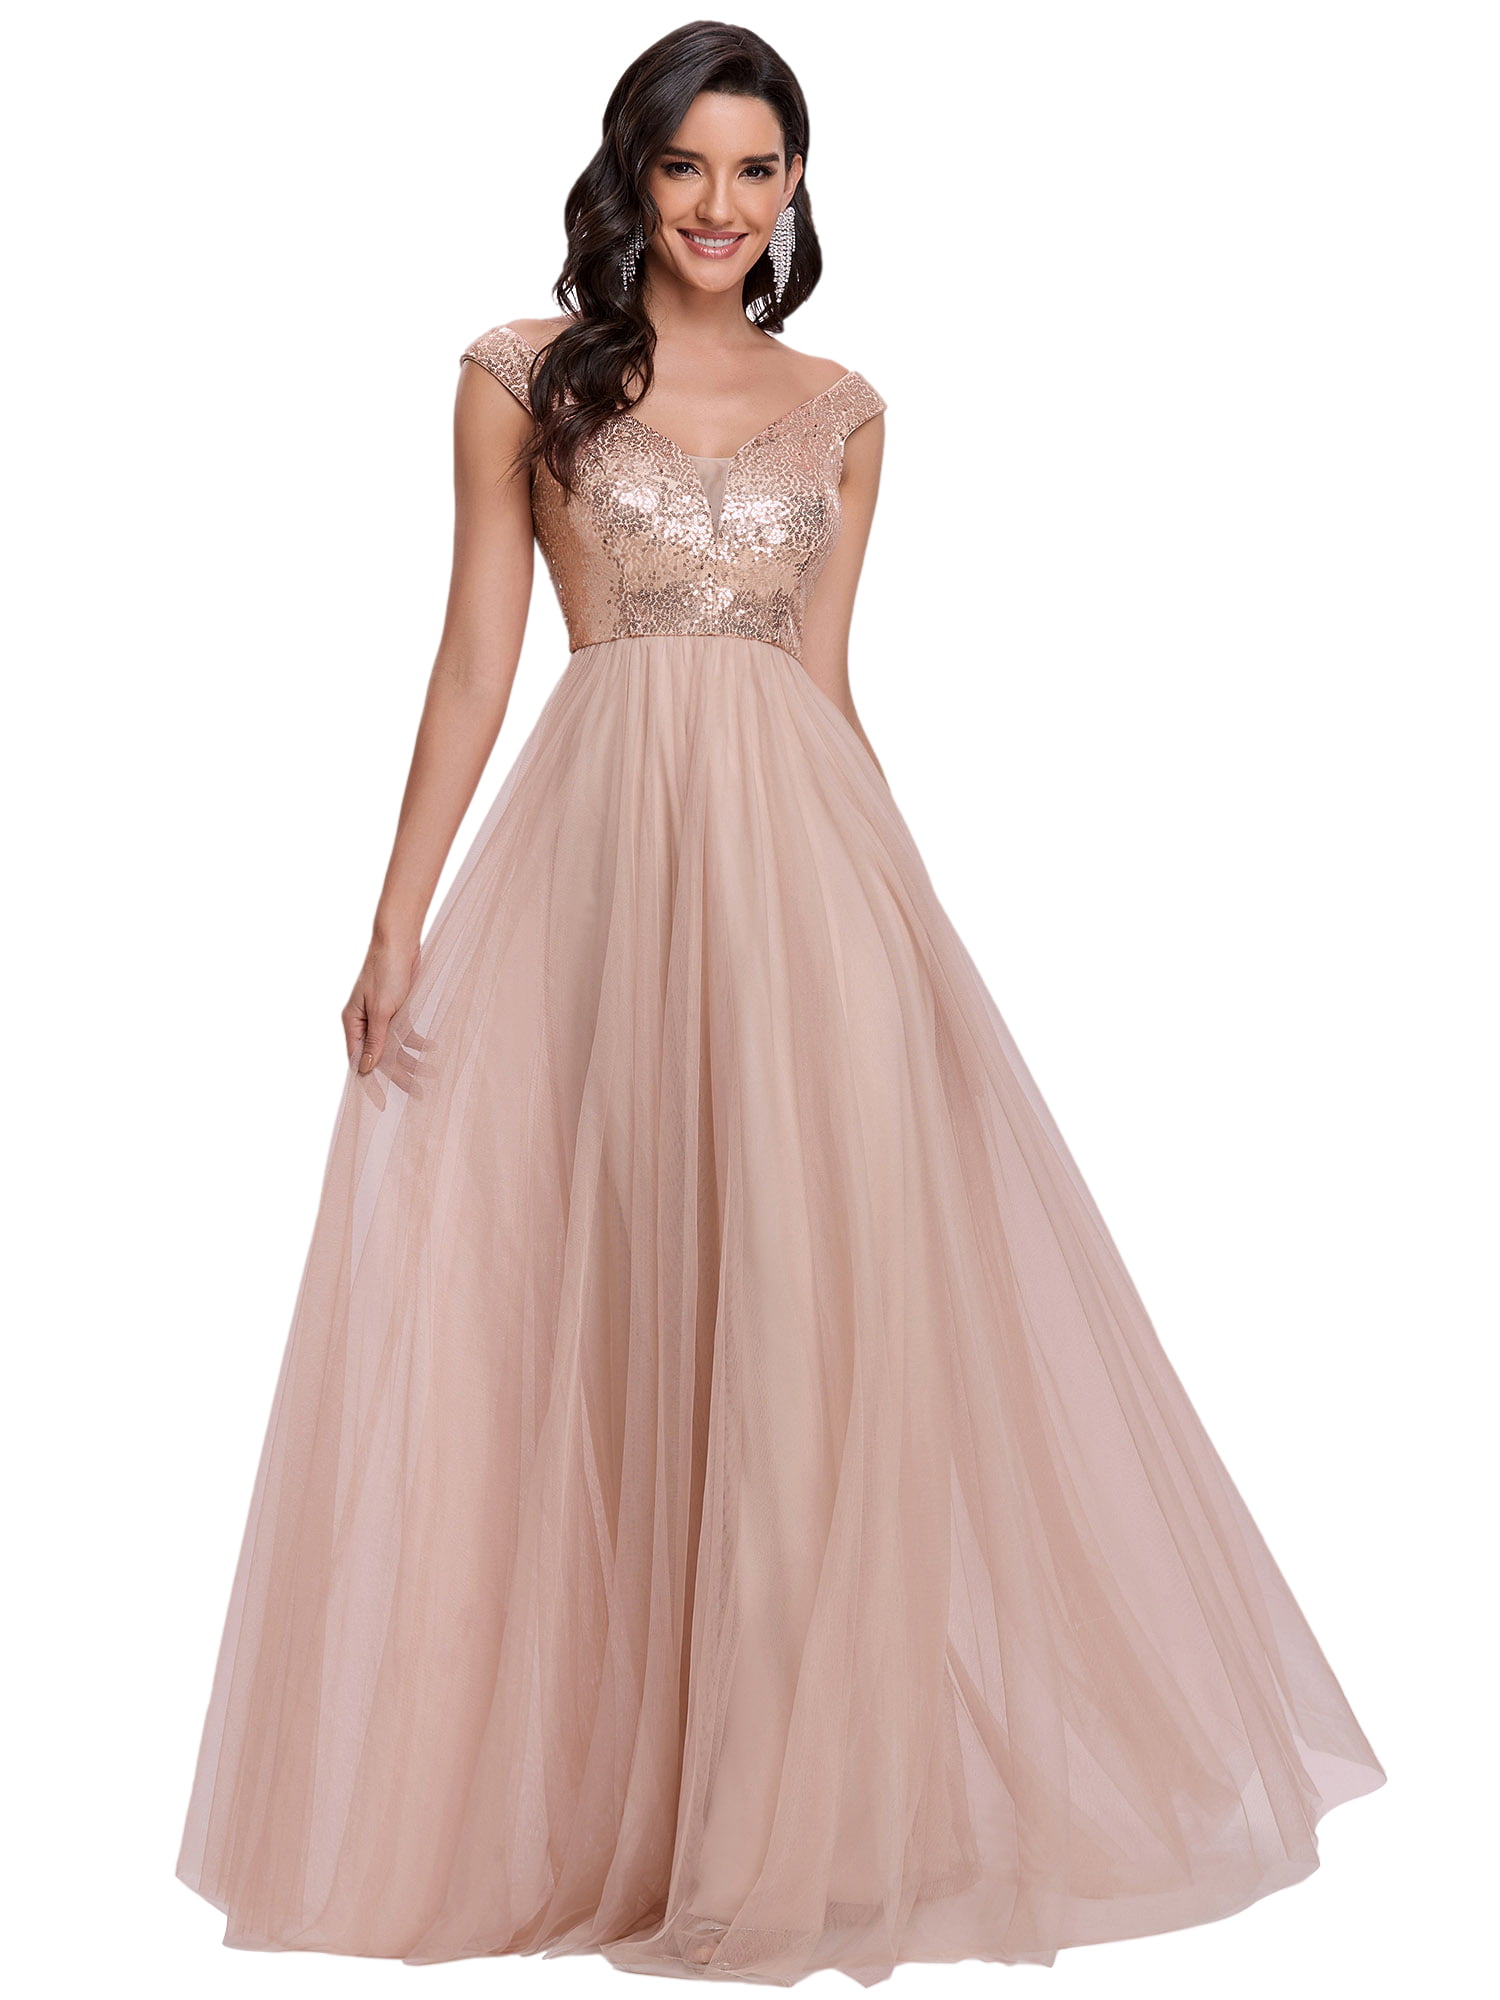 Women's Halter Long Bridesmaid Dresses Chiffon Pleated Formal Prom Gown A-Line Evening Ball Dress